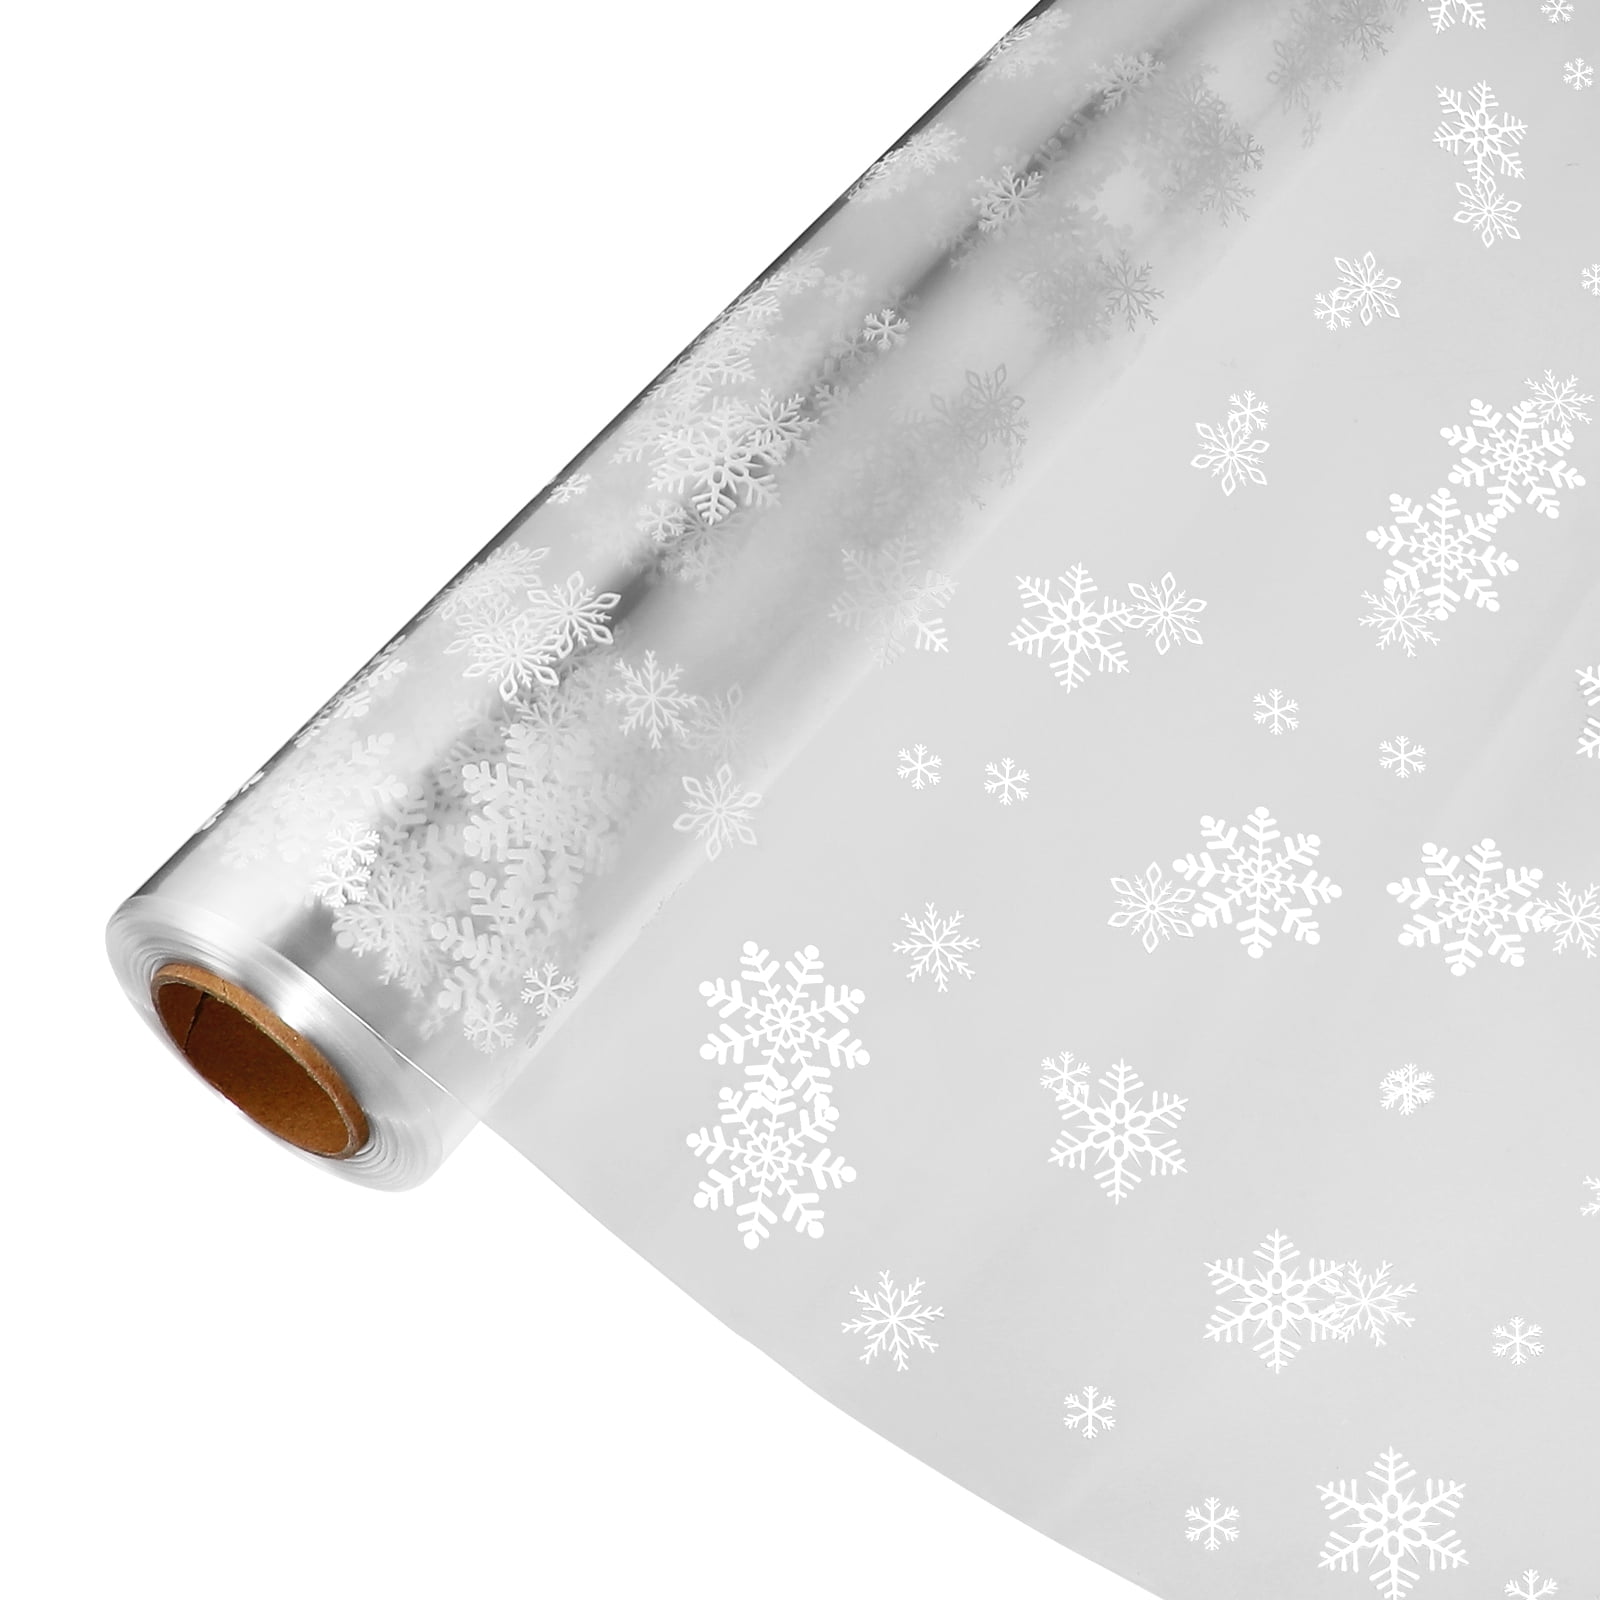 HAND Fun Wrapping Paper Tape 15mW (No.8- Snowflake Patterns 10 Meters) Pack  of 2 Rolls